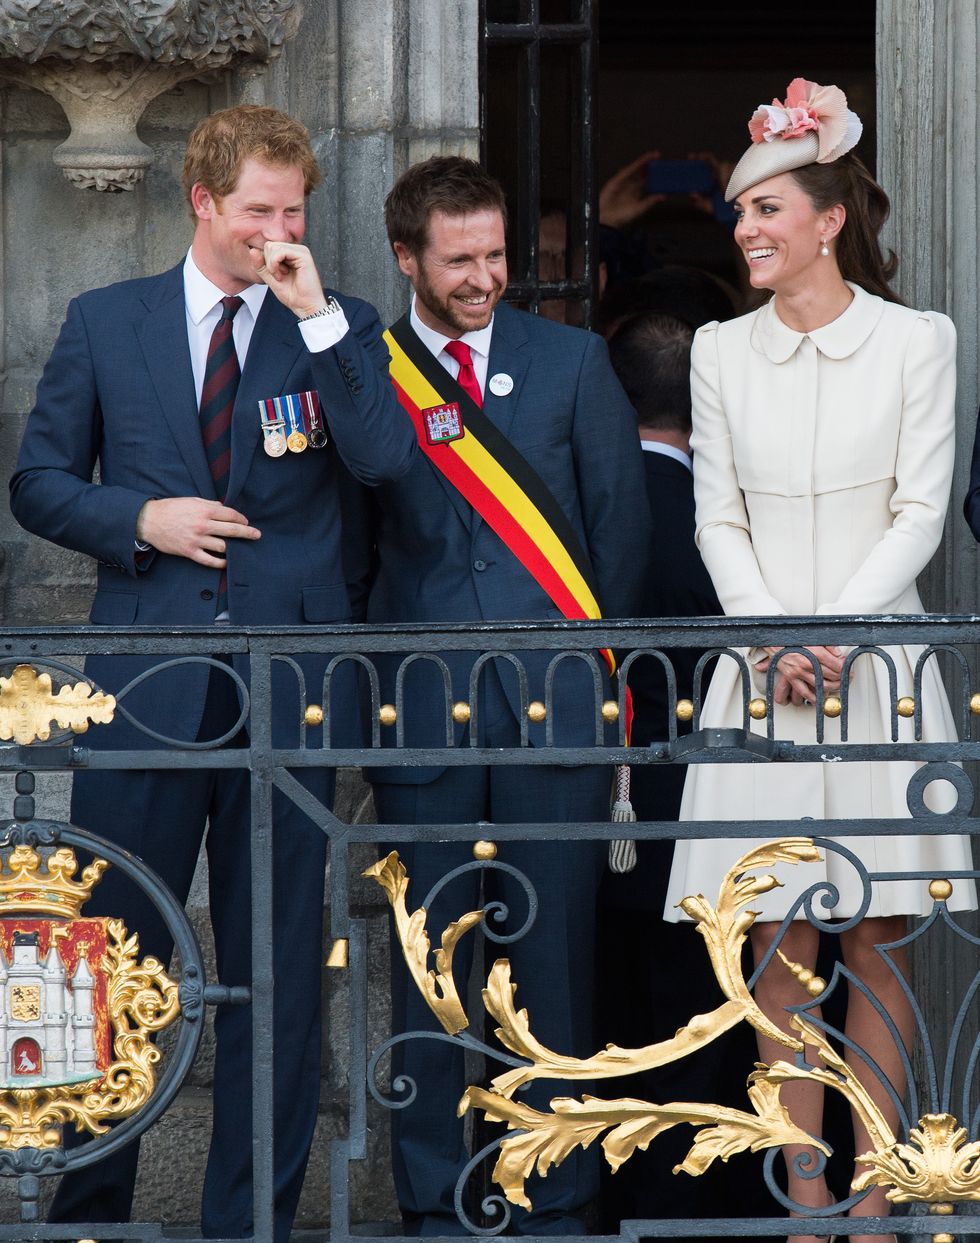 Prince Harry at the Grand Place in Belgium.